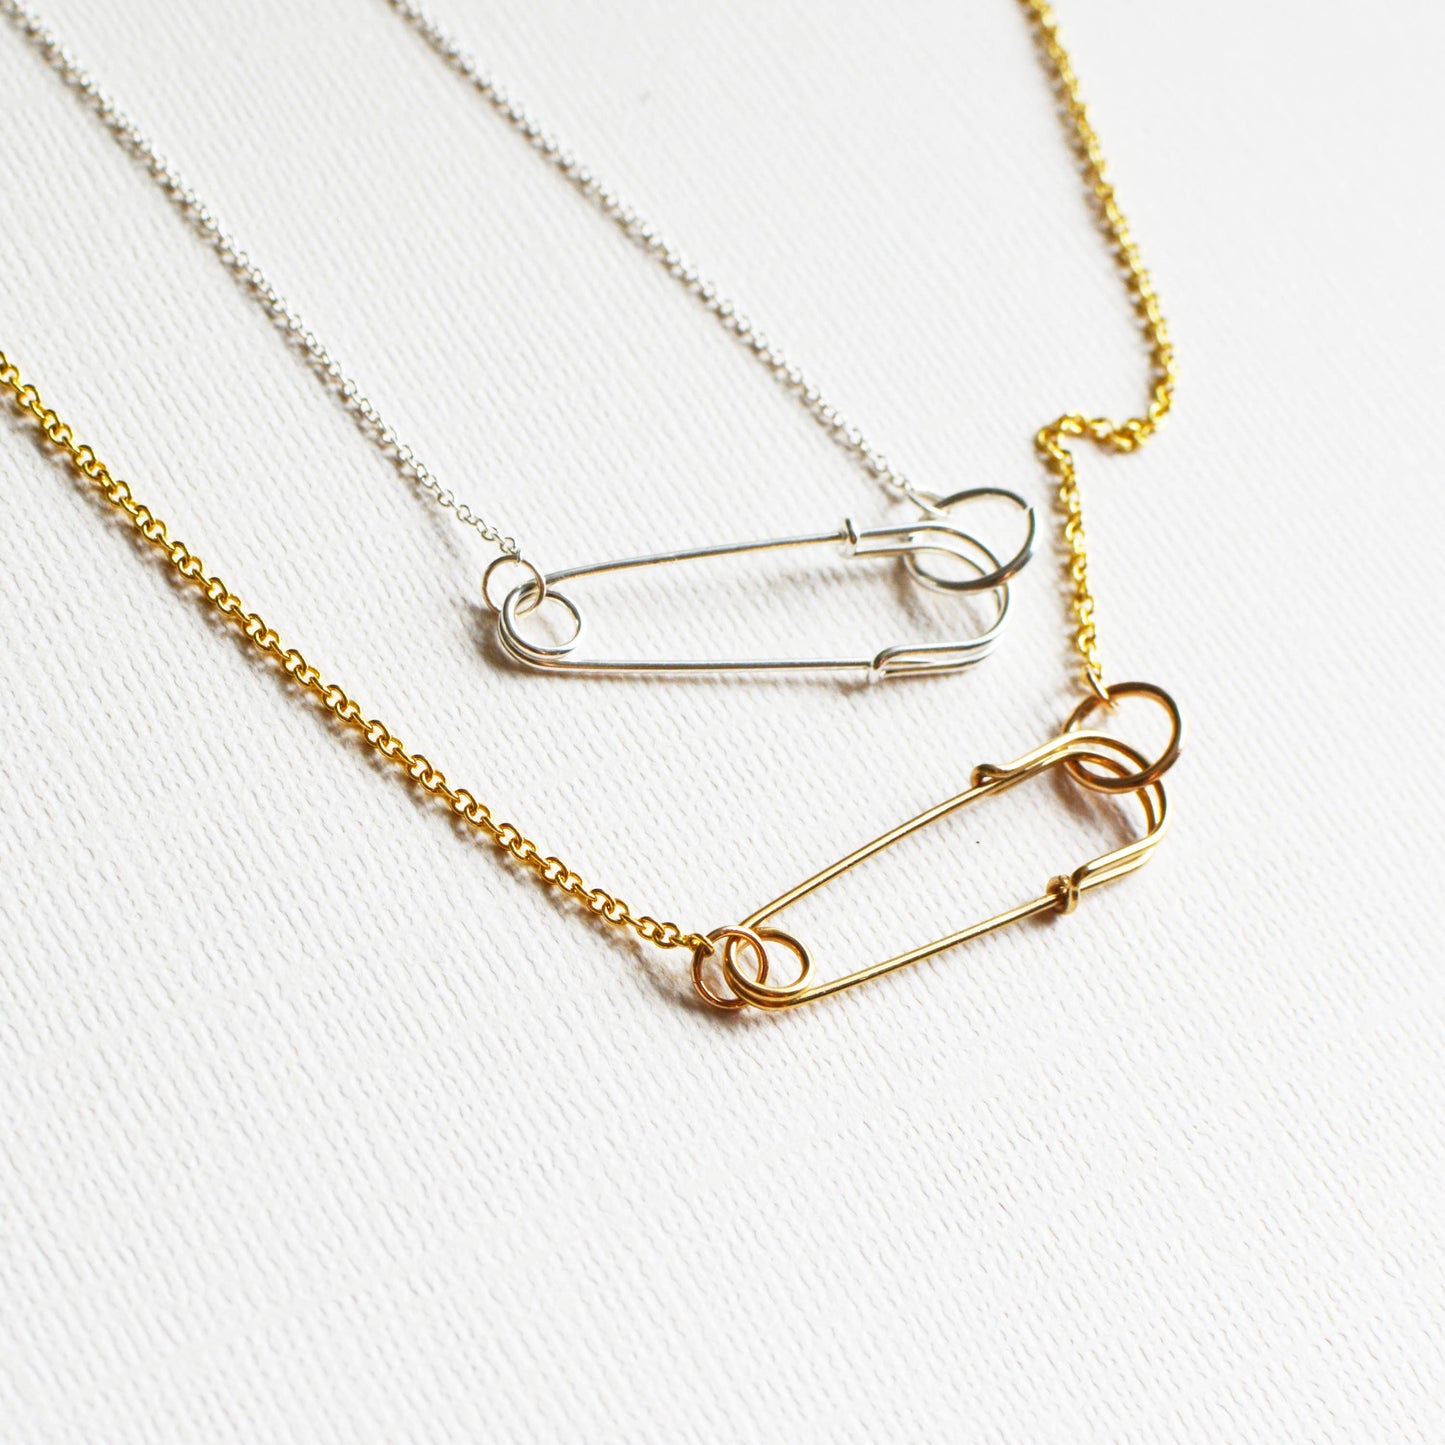 Safety Pin Necklace: Sterling Silver